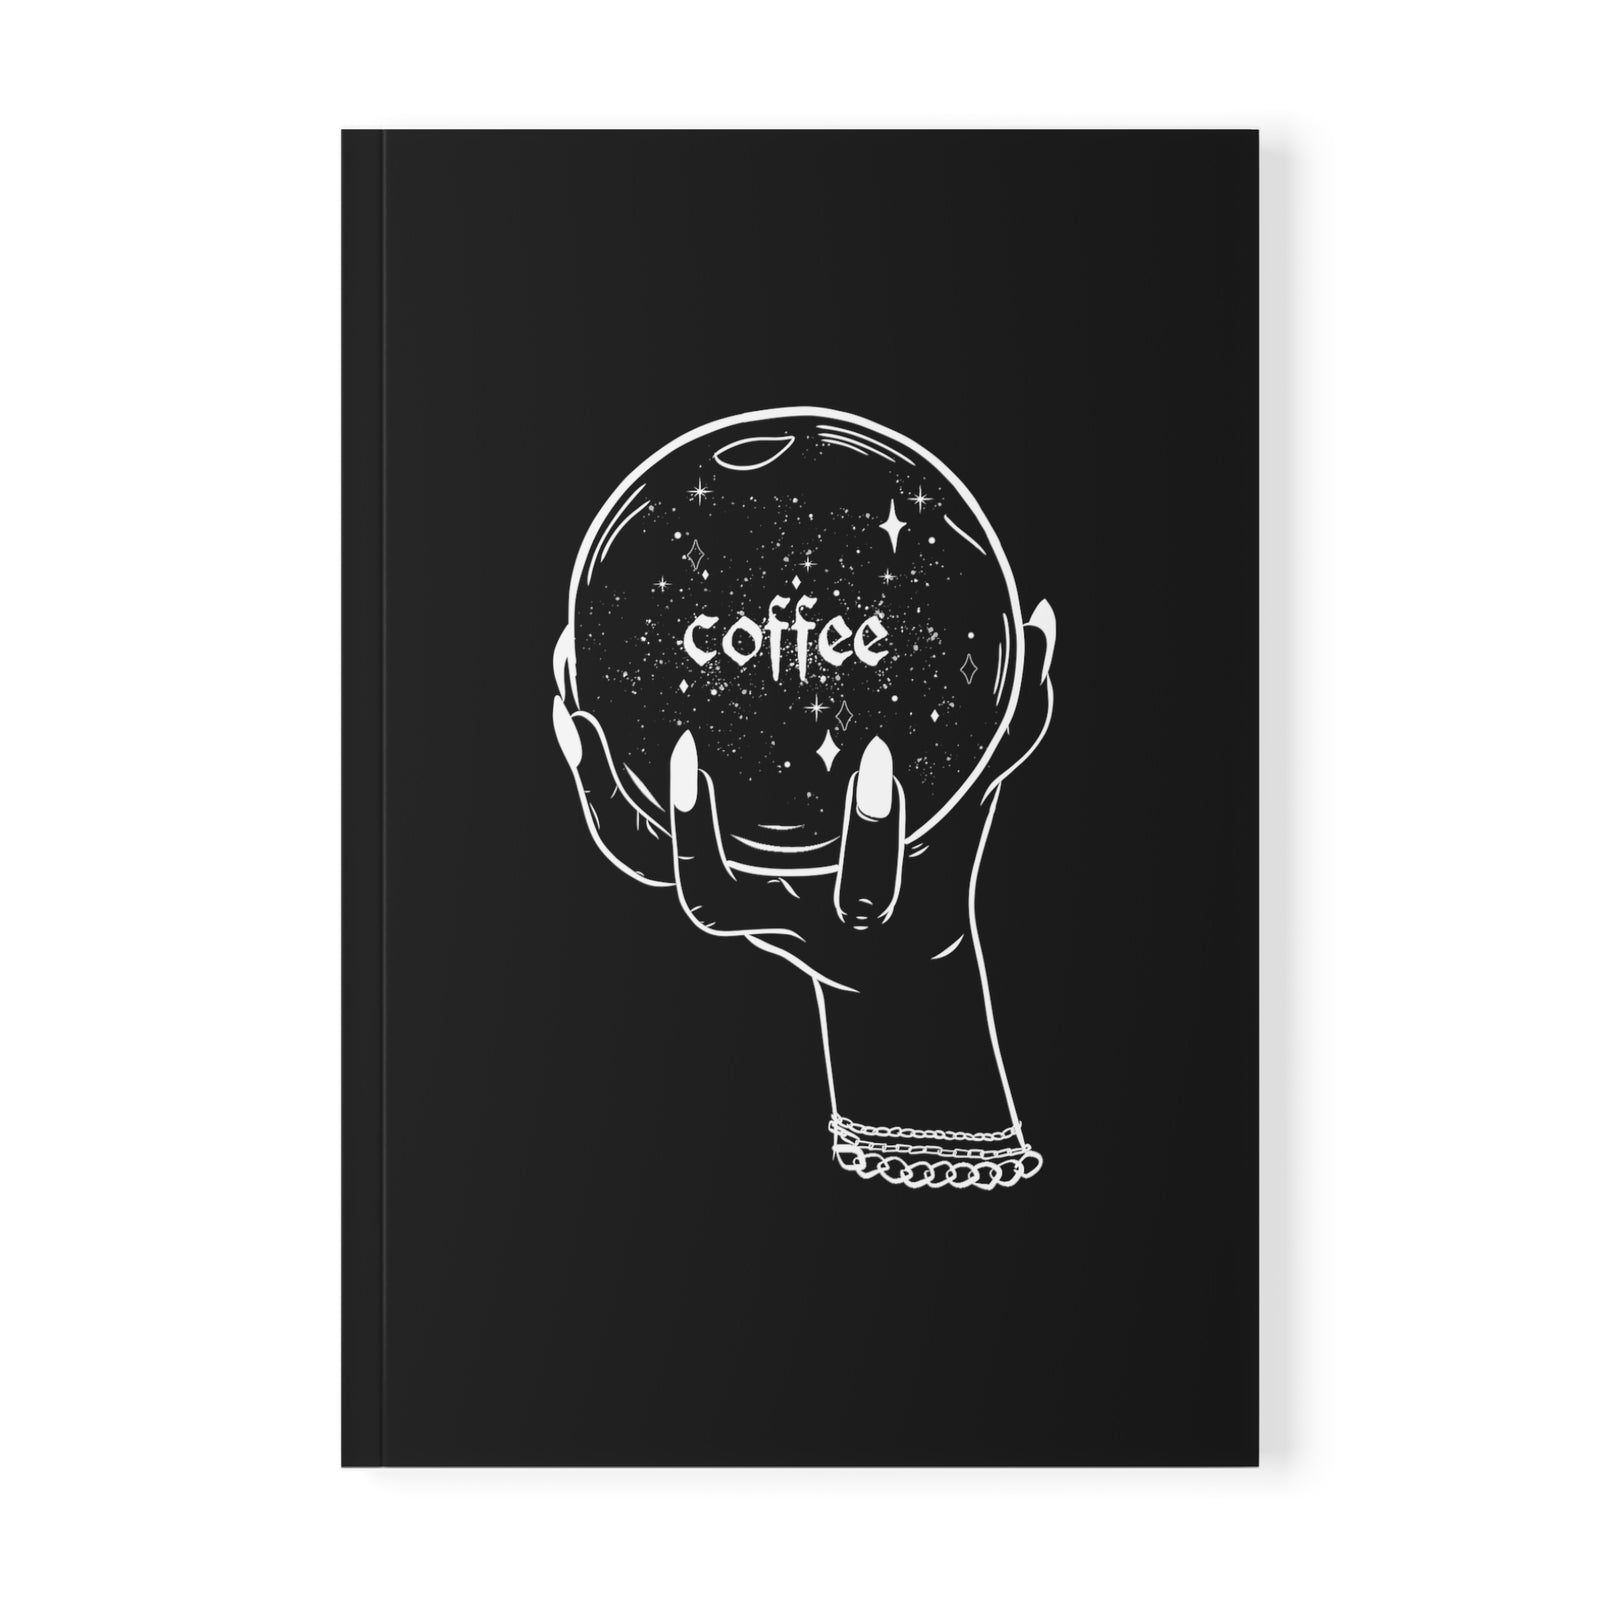 I See Coffee A5 Notebook